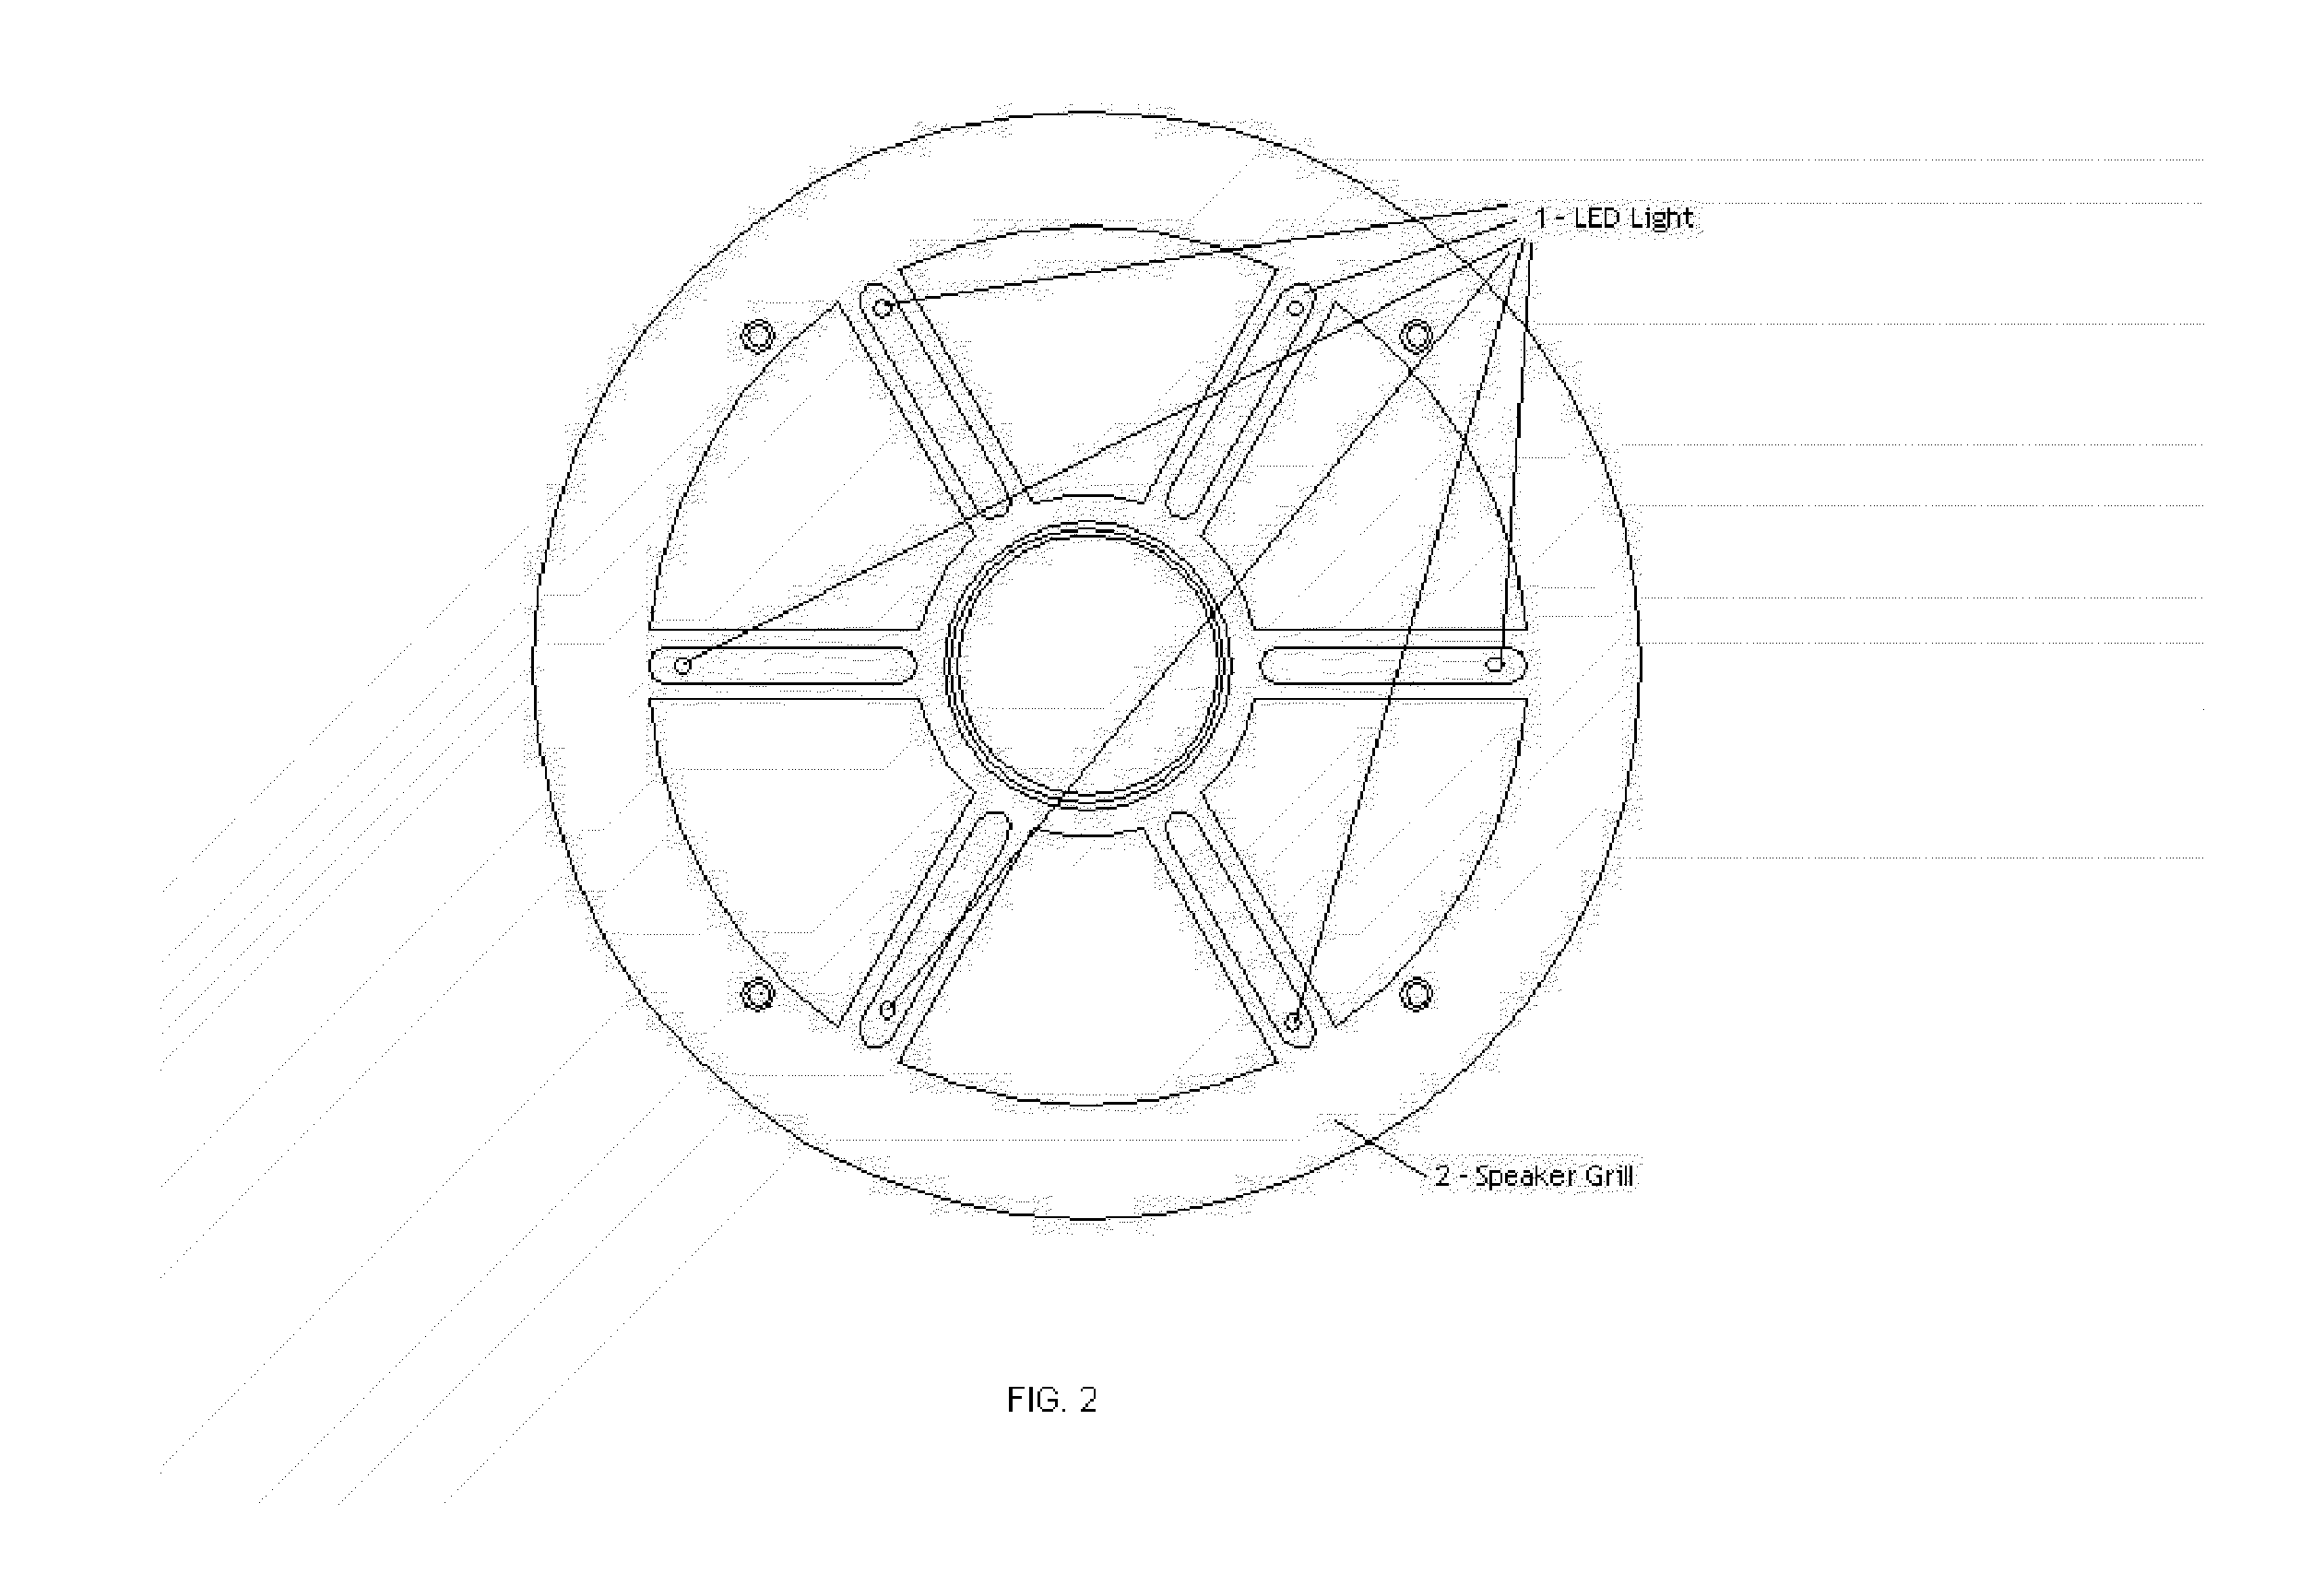 An audio speaker system and method containing LED lights